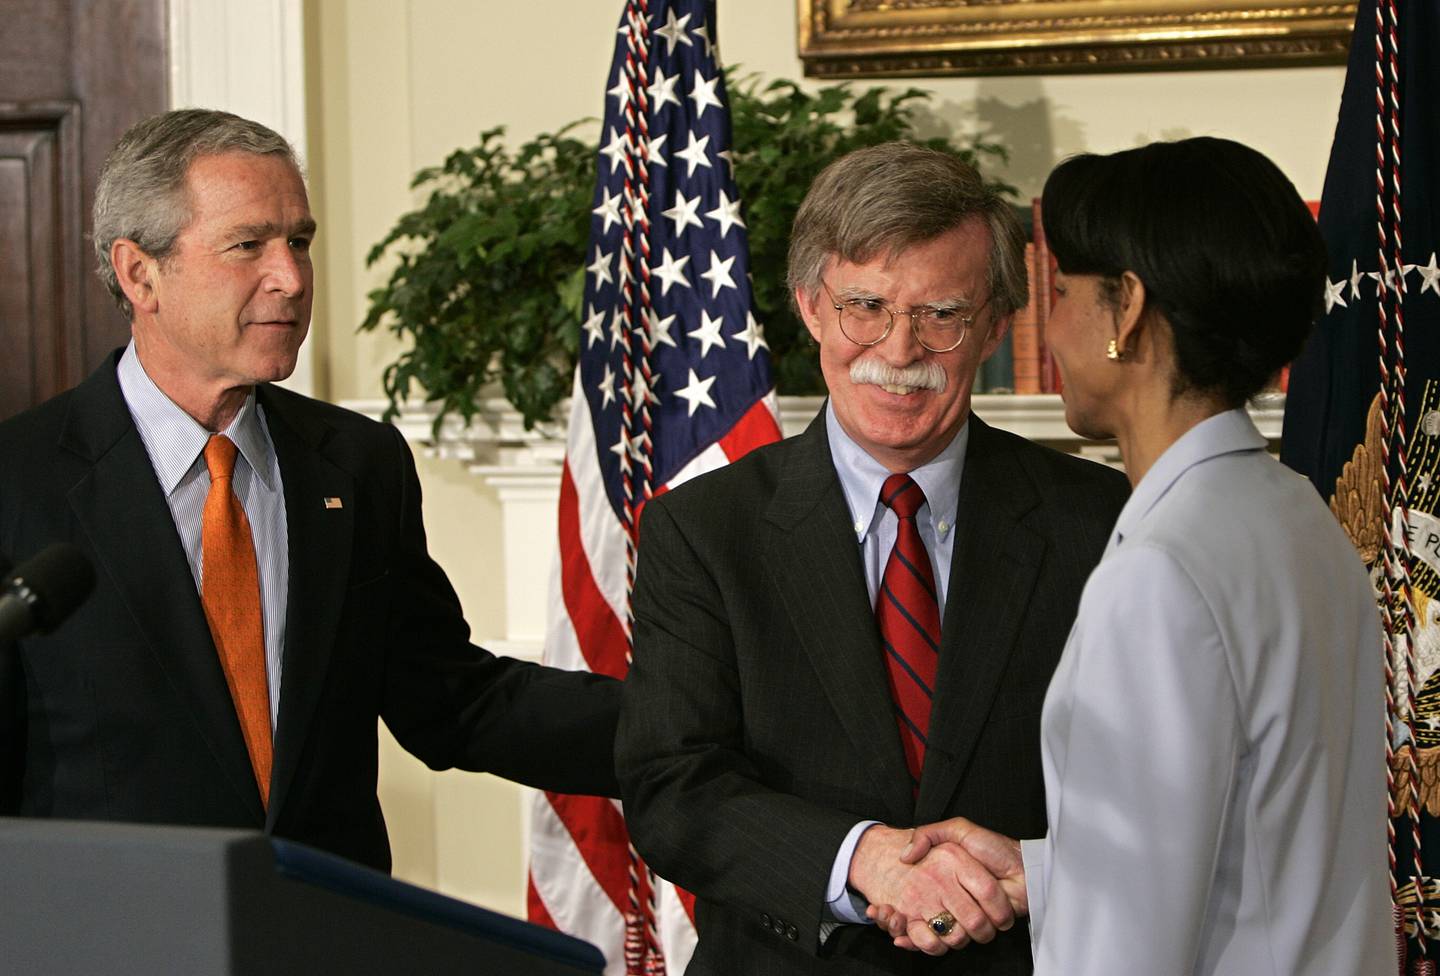 John Bolton (C) is congratulated by US Secretary of State Condoleezza Rice (R) after being installed by President George W Bush (L) as the permanent Ambassador to the United Nations for the US in the Roosevelt Room of the White House 01 August, 2005 in Washington, DC. Bolton has faced harsh criticism by oppenets, and pledged to work for a "stronger, more effective" United Nations while promoting US interests and values at the world body. Bolton, 56, said he would work tirelessly to advance the agenda of President George W. Bush, who appointed him to the post by decree after his confirmation vote in the US Senate was blocked for months. AFP PHOTO/Brendan SMIALOWSKI